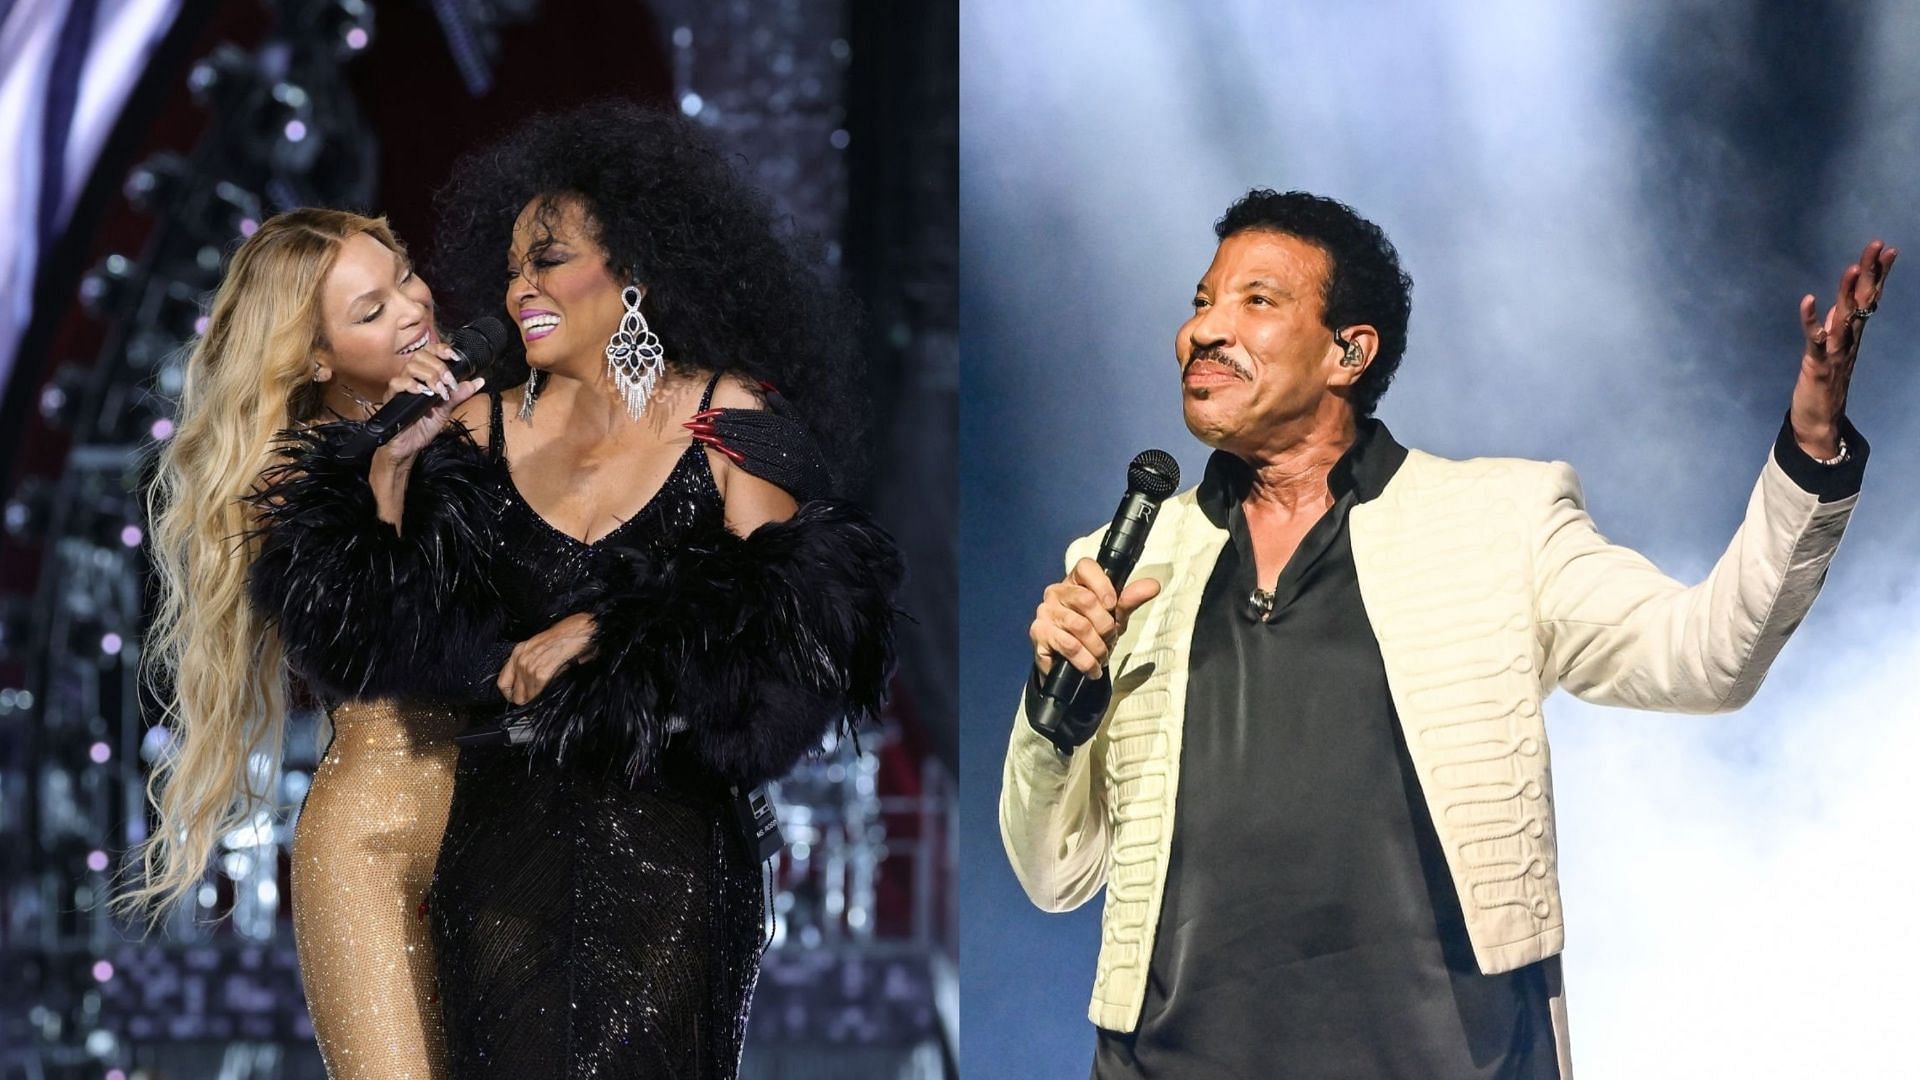 Lionel Richie is ticked about Dianna Ross singing to Beyonc&eacute;. (Images via Getty Images)